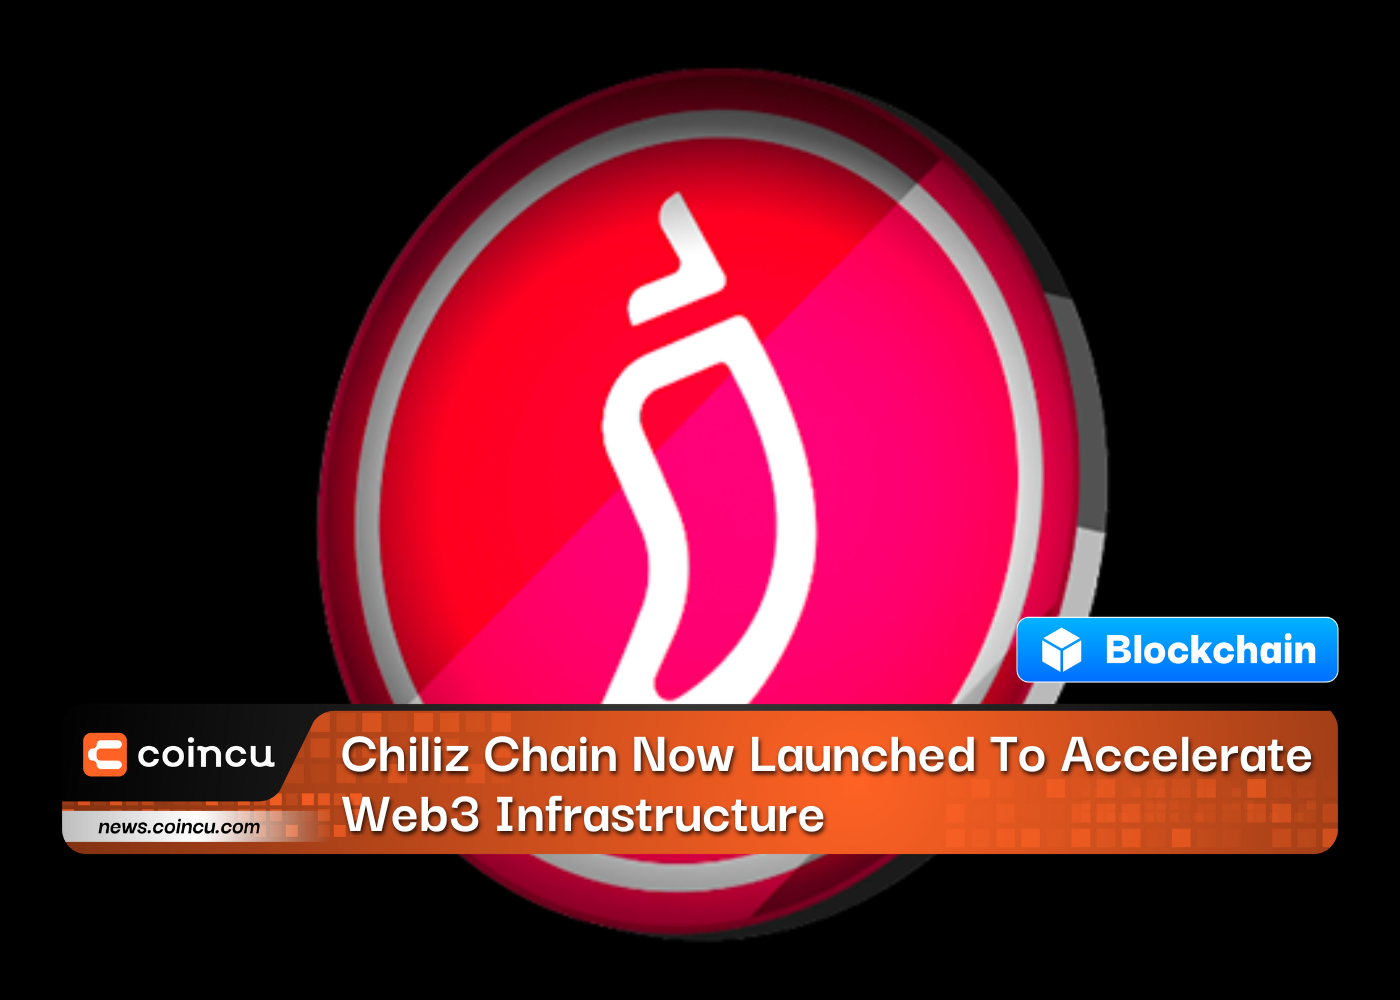 Chiliz Chain Now Launched To Accelerate Web3 Infrastructure